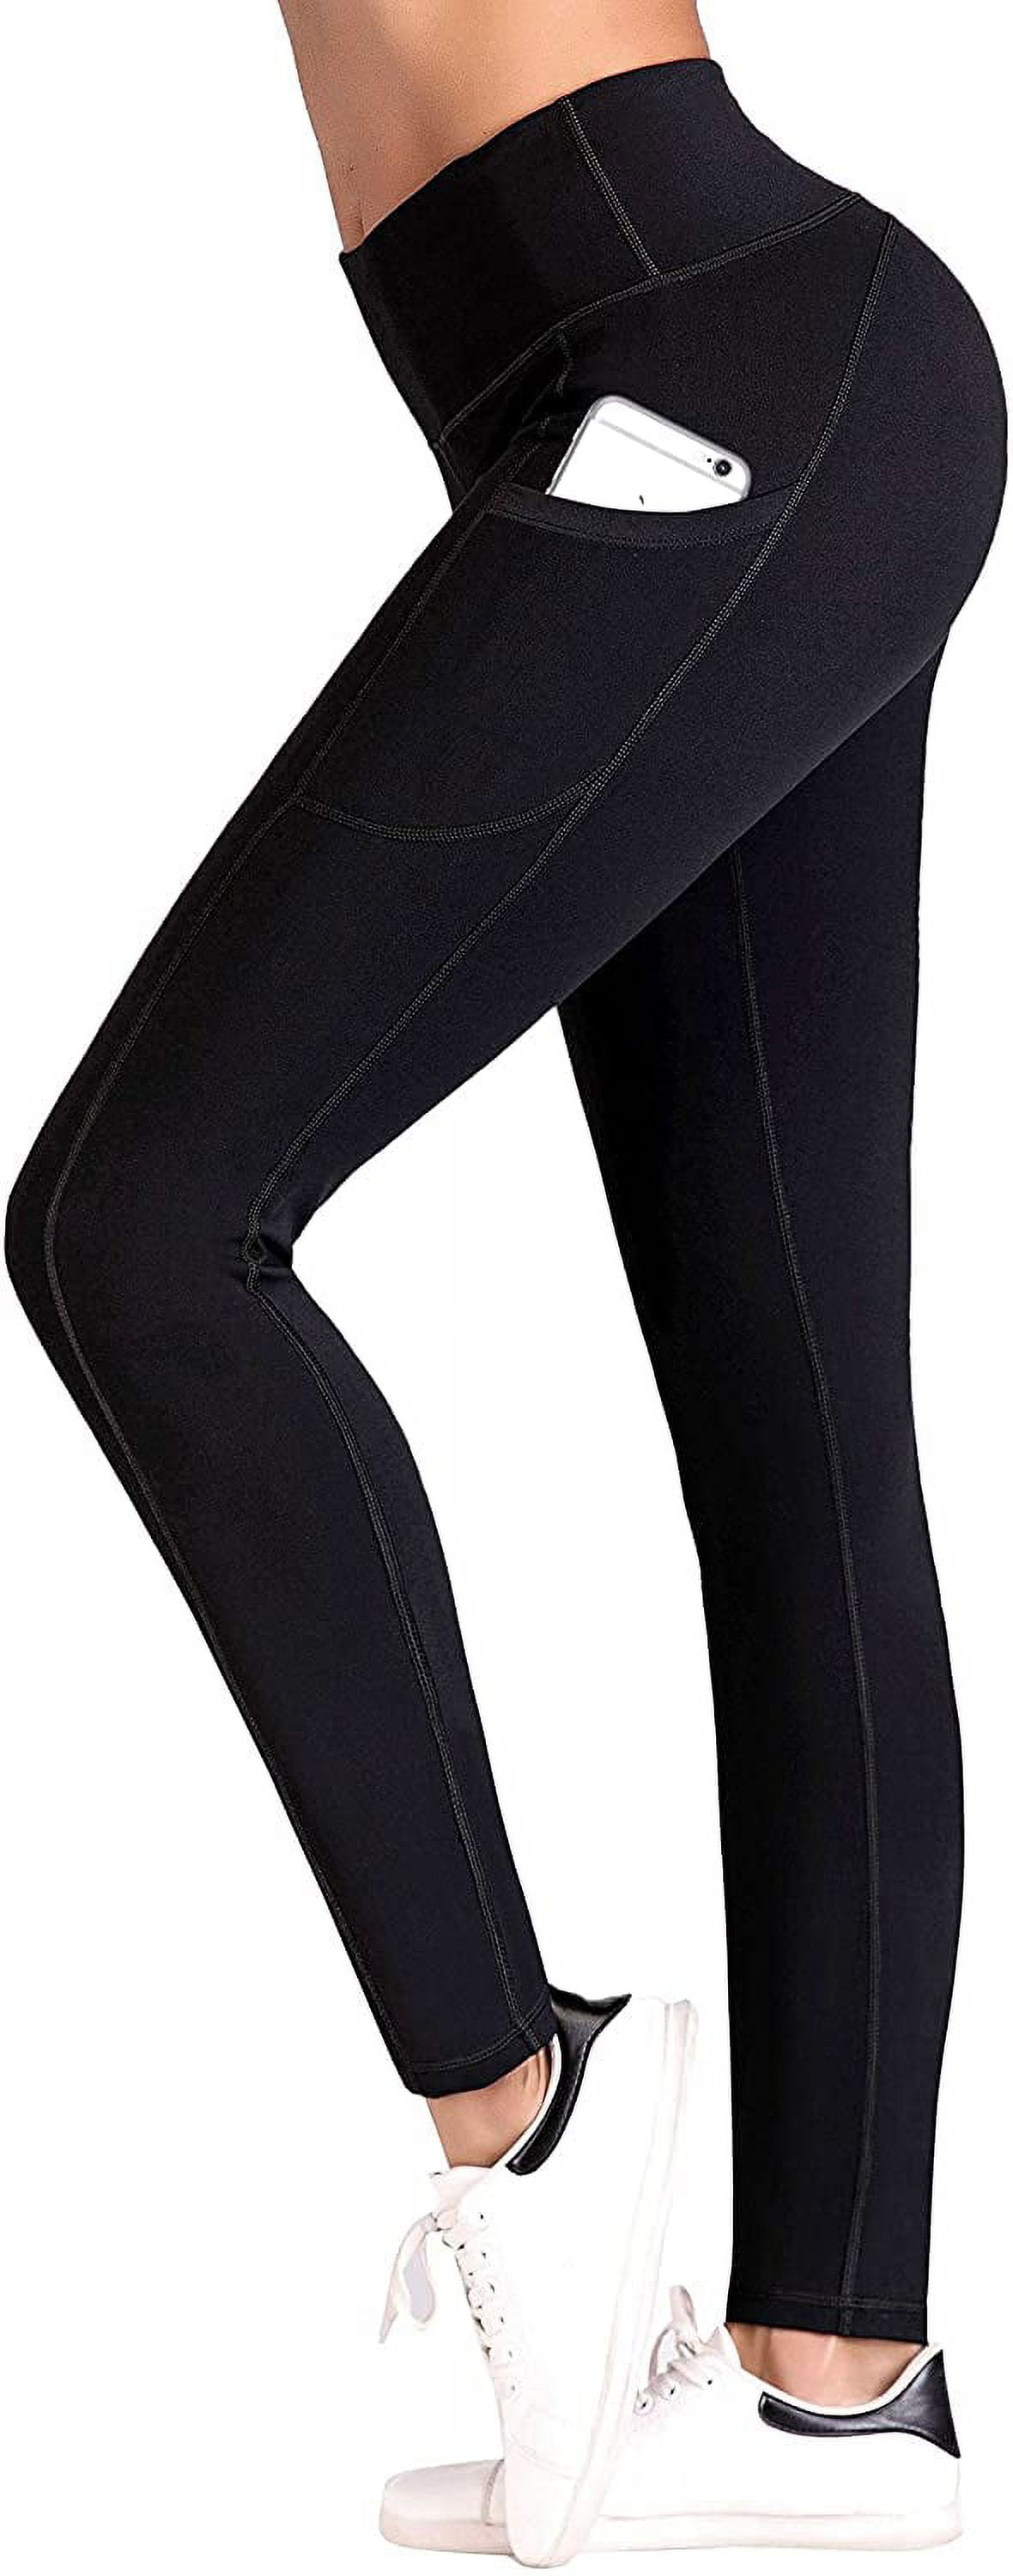 IUGA High Waist Yoga Pants with Pockets, Tummy Control, Workout Pants for Women  4 Way Stretch Yoga Leggings with Pockets 